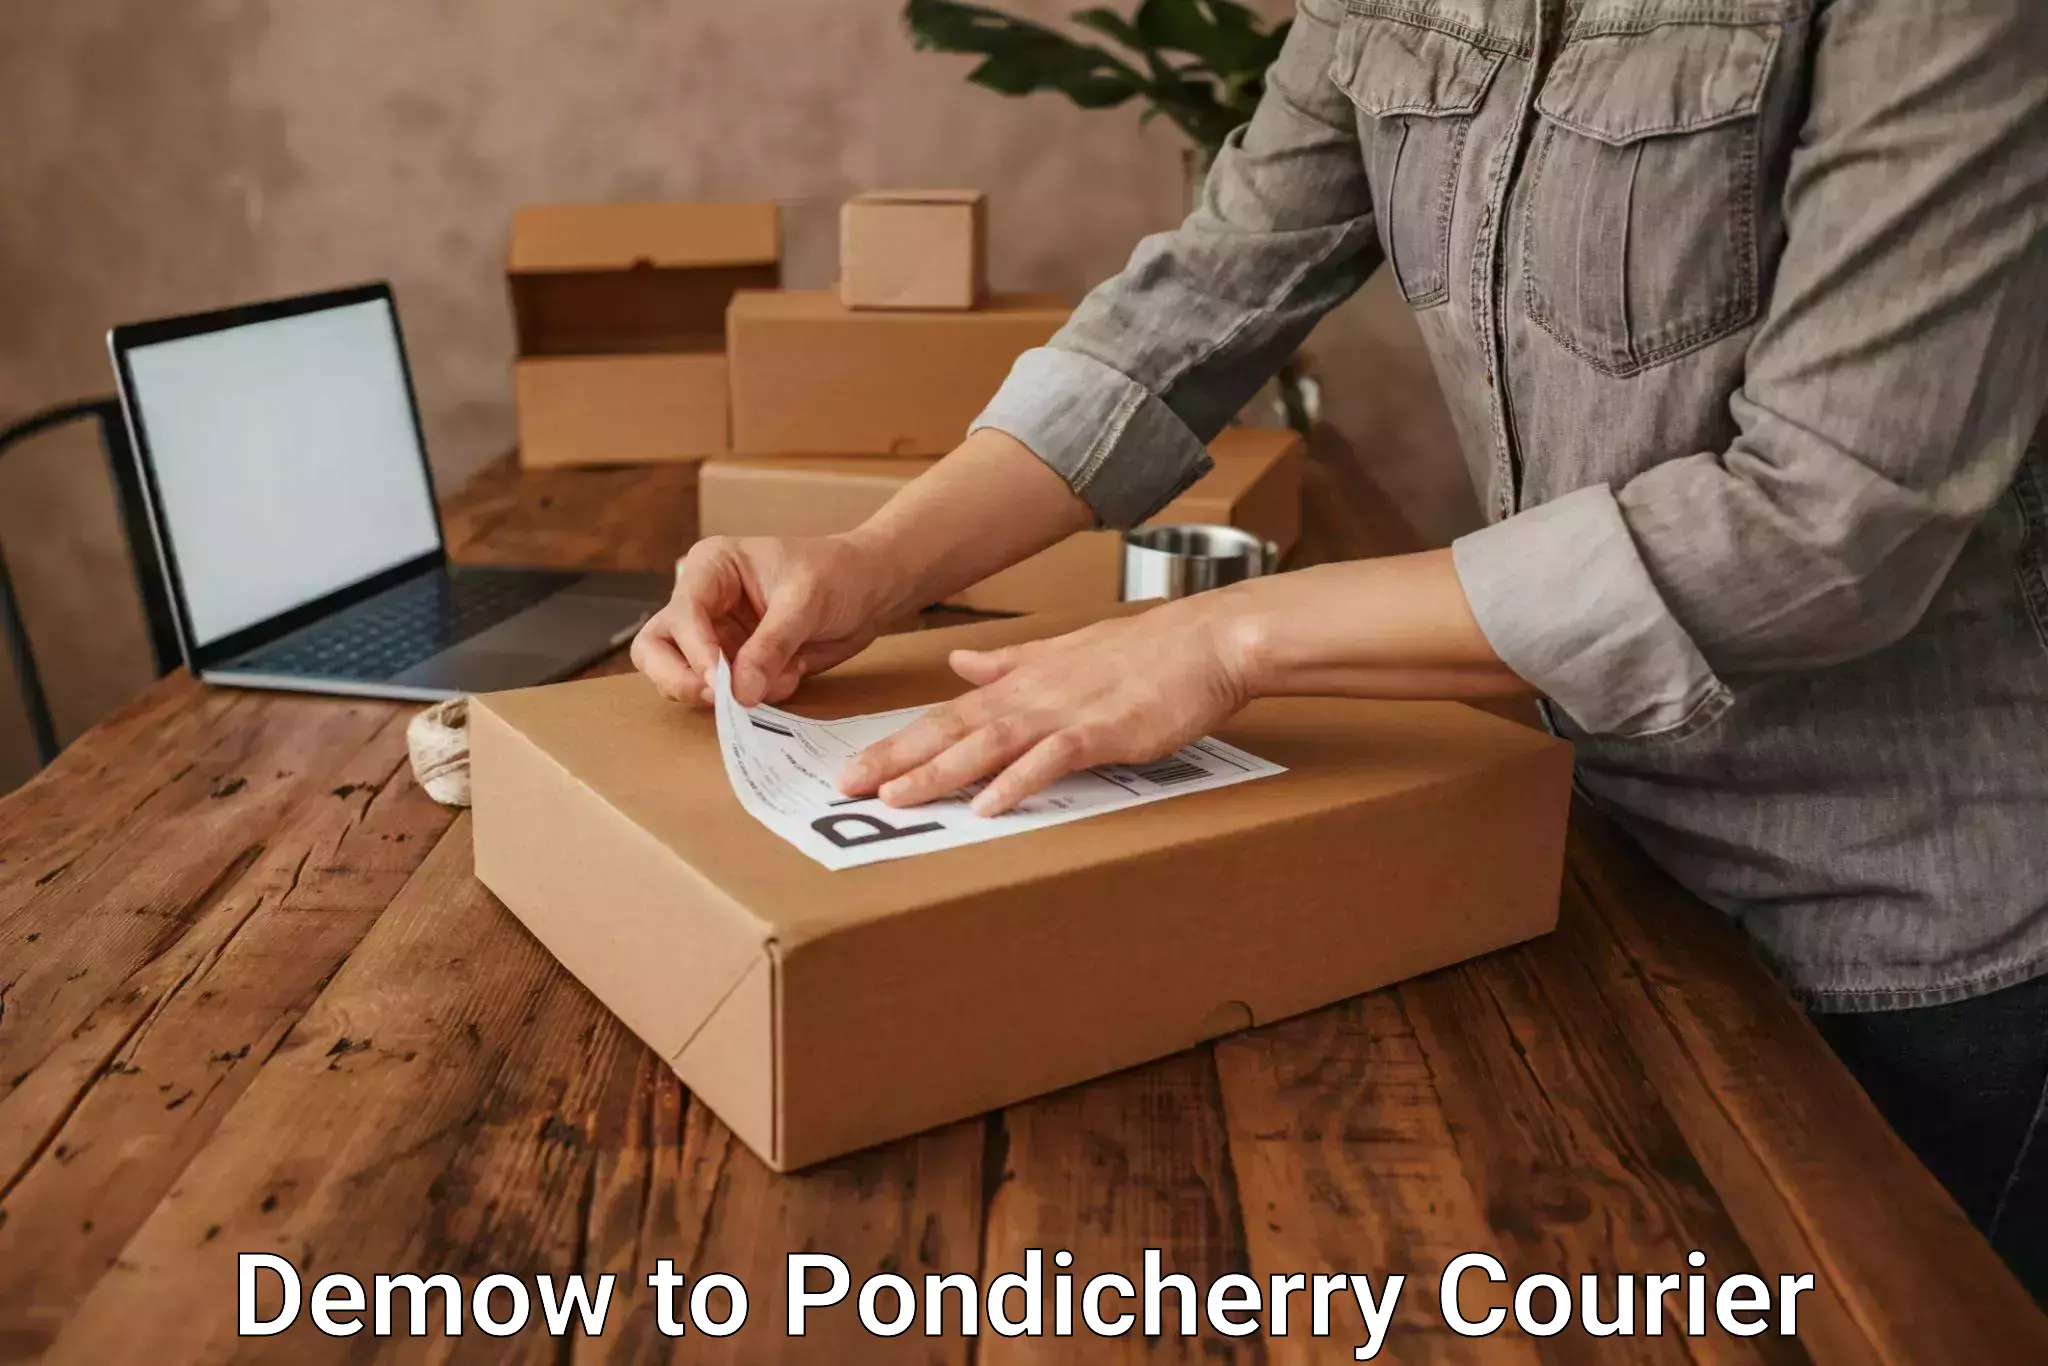 Nationwide courier service Demow to Pondicherry